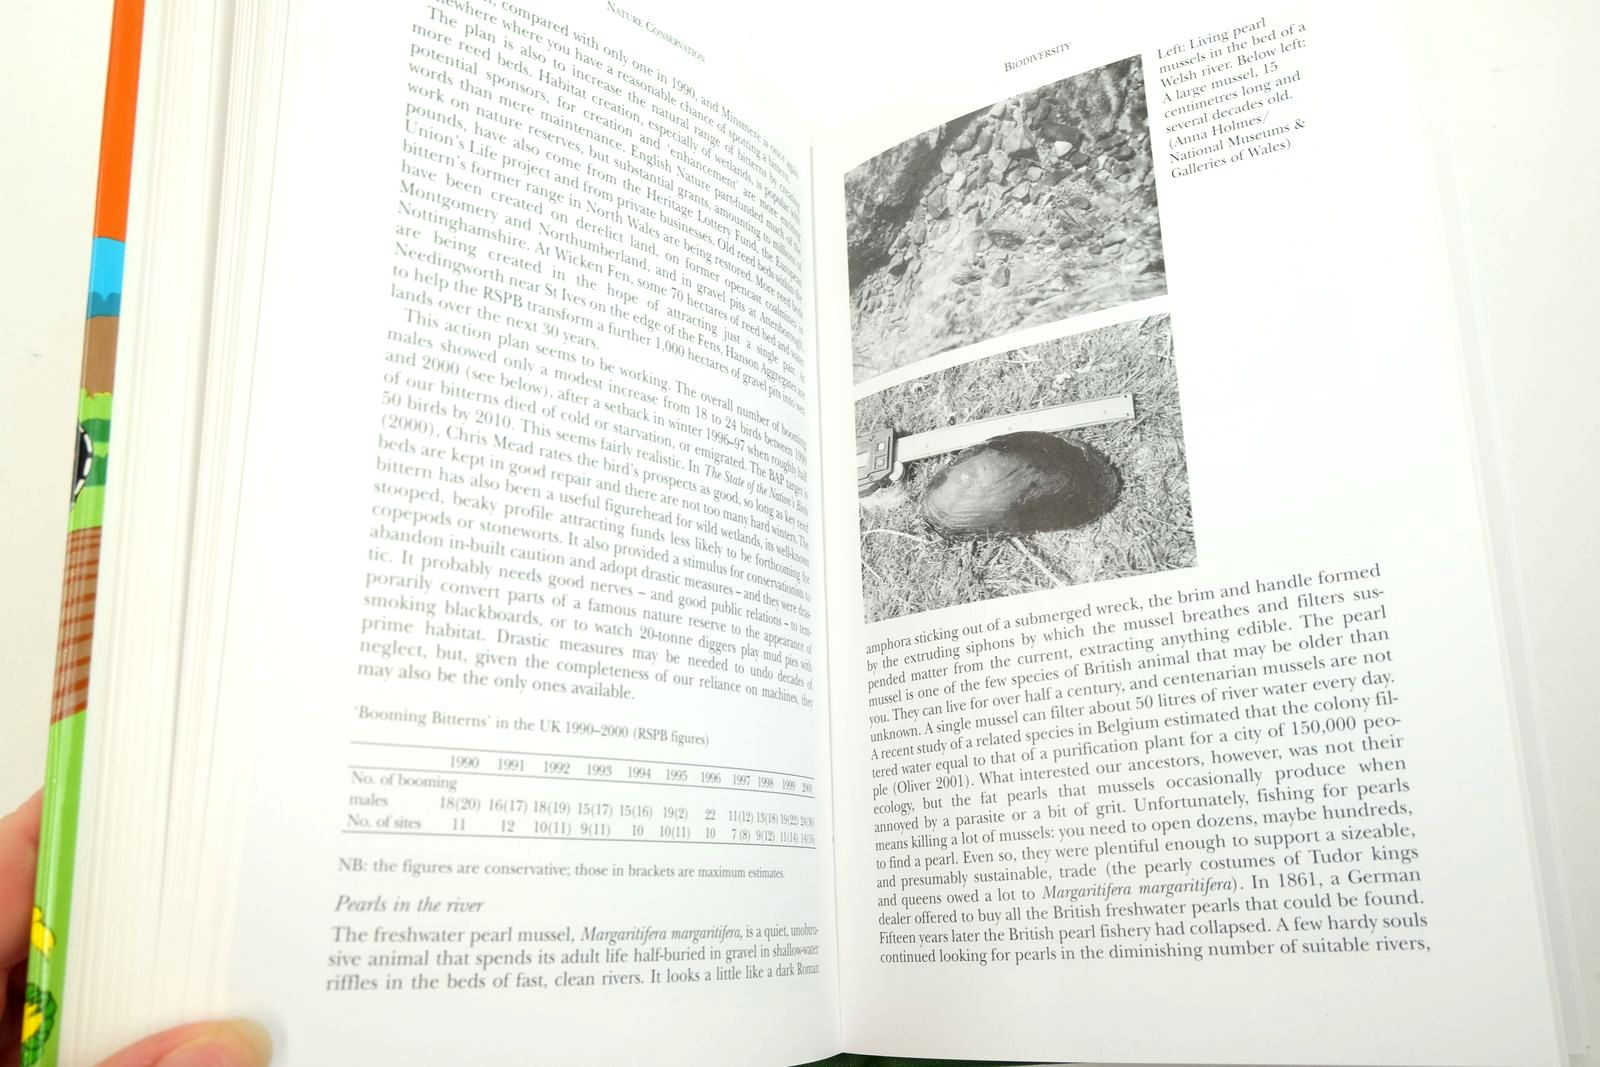 Photo of NATURE CONSERVATION (NN 91) written by Marren, Peter published by Harper Collins (STOCK CODE: 2139945)  for sale by Stella & Rose's Books